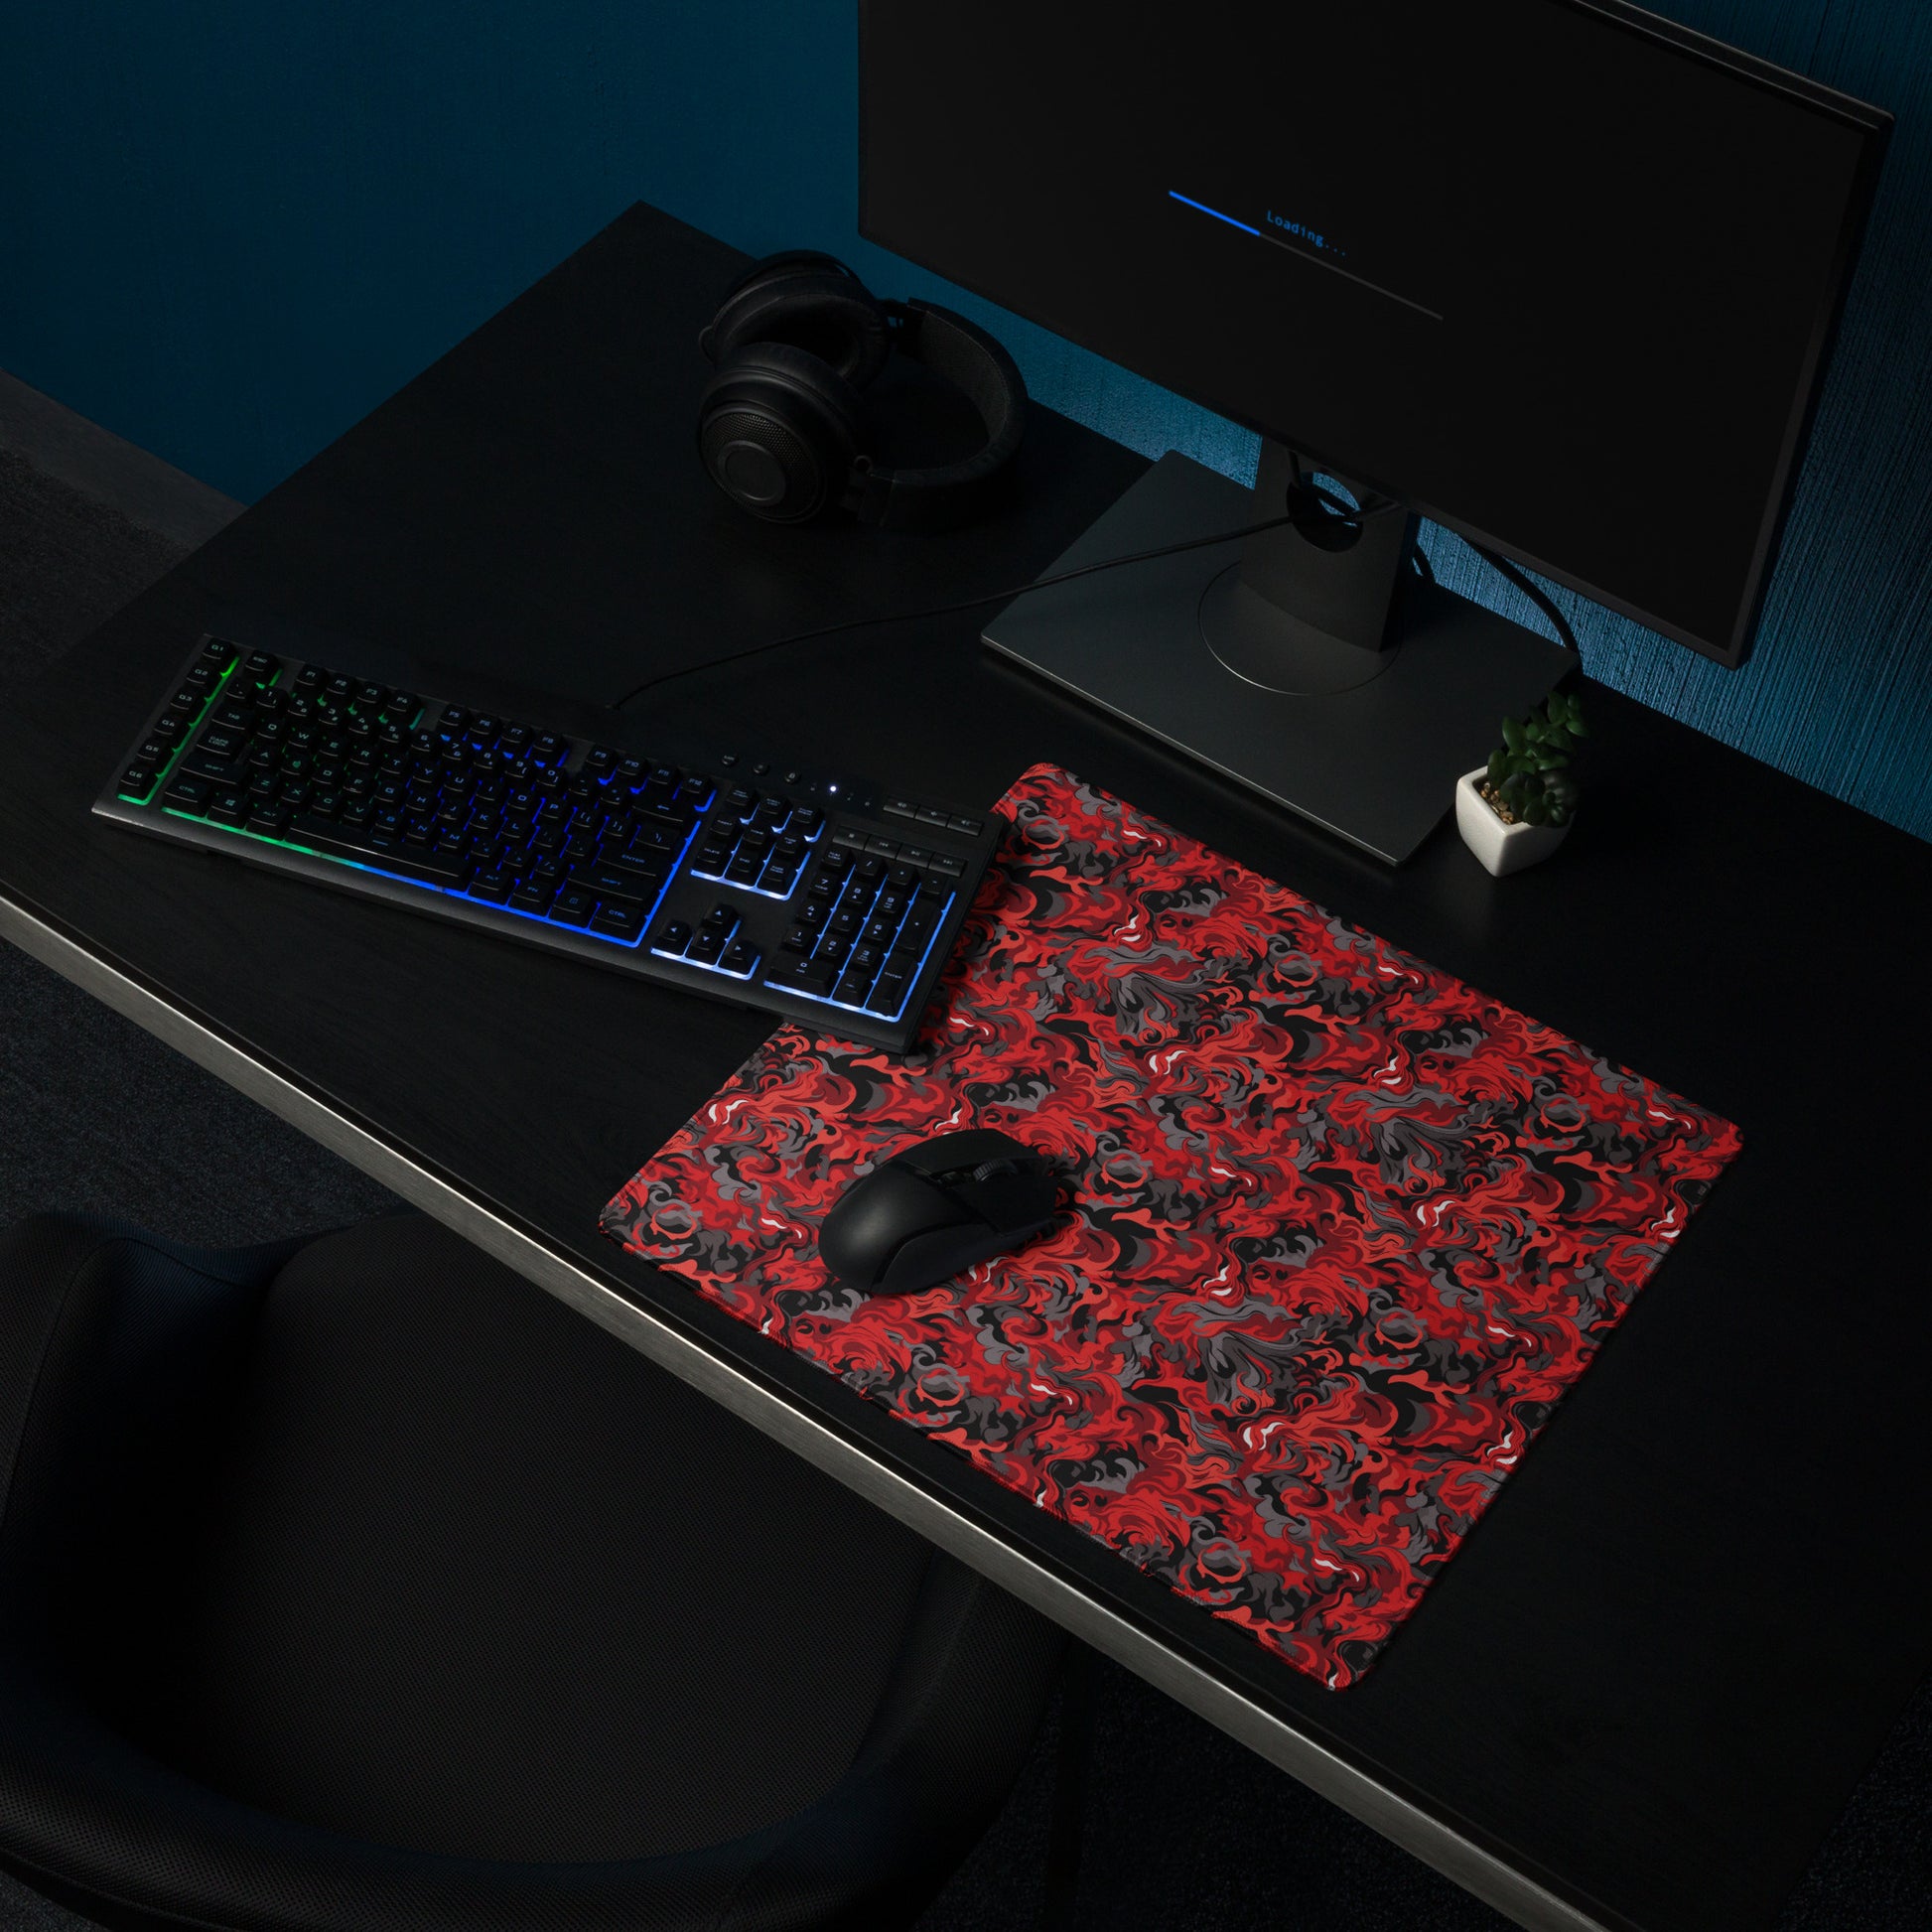 A 18" x 16" desk pad with a black and red camo pattern sitting on a desk.